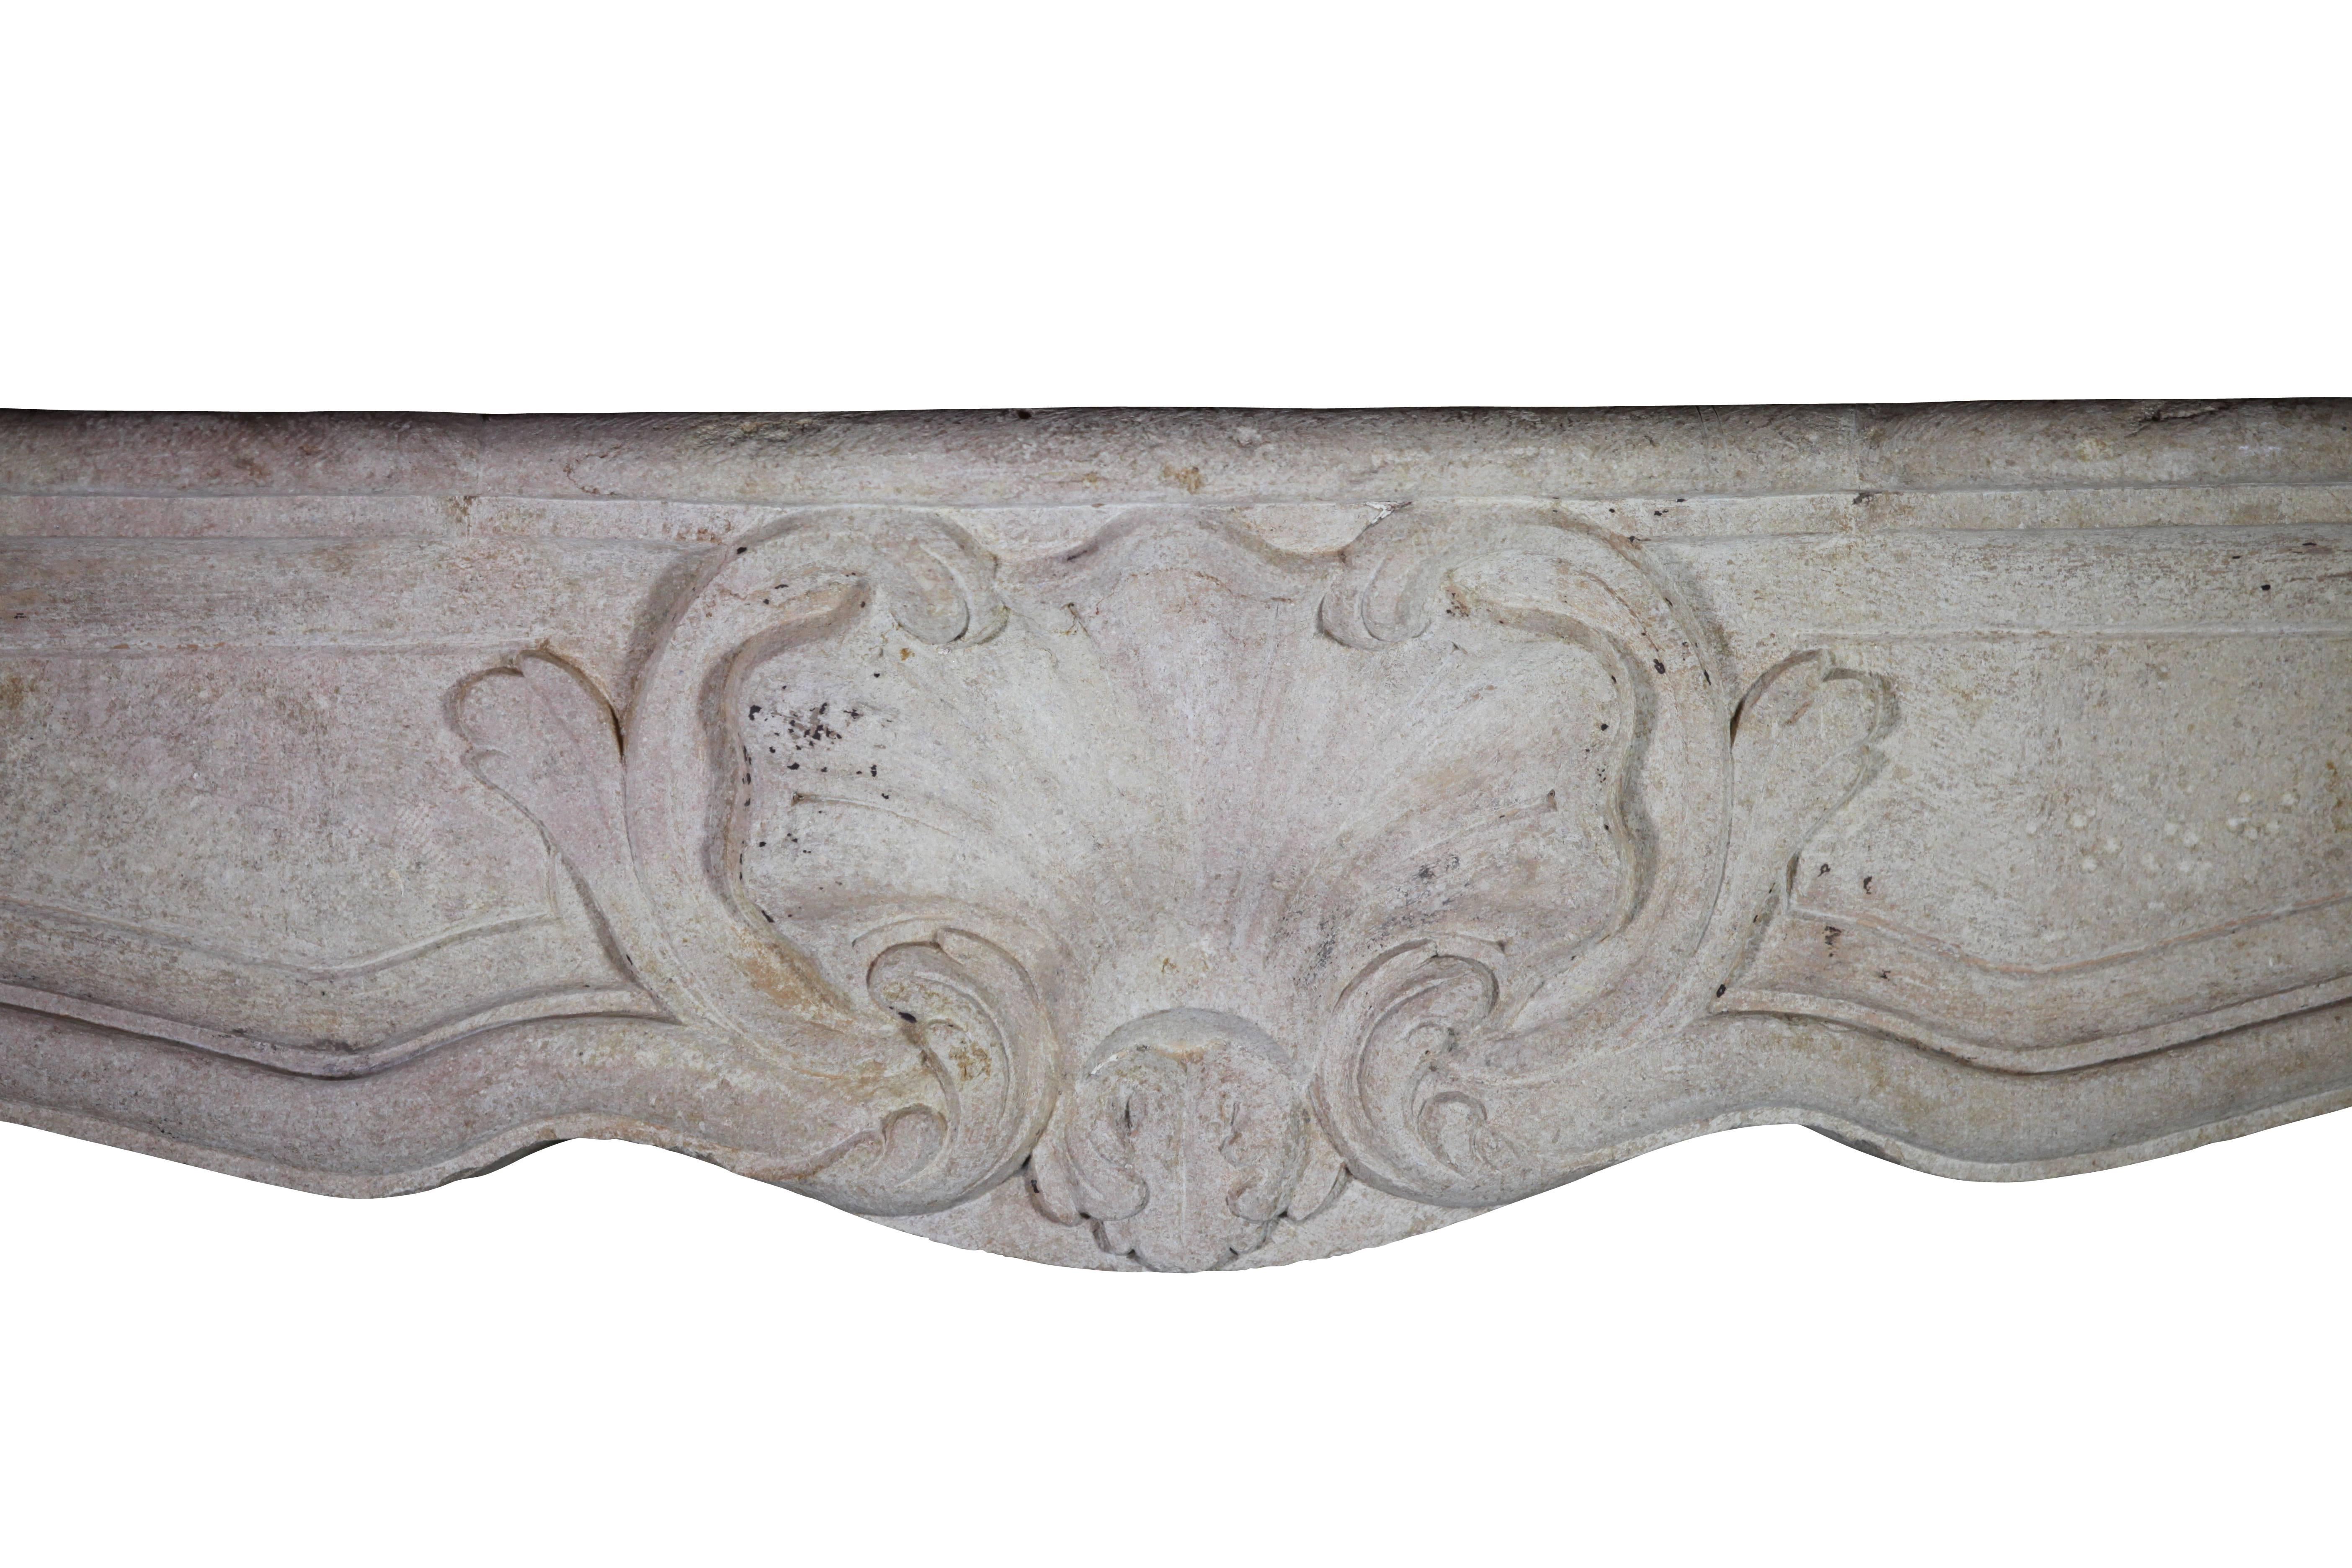 This fireplace surround has a very nice central LXV motif and a richly carved front. A classic Louis XV decorative country fireplace. The limestone is a bicolor from the Burgundy region. It gives this piece an extra twist.
Measures:
159 cm EW